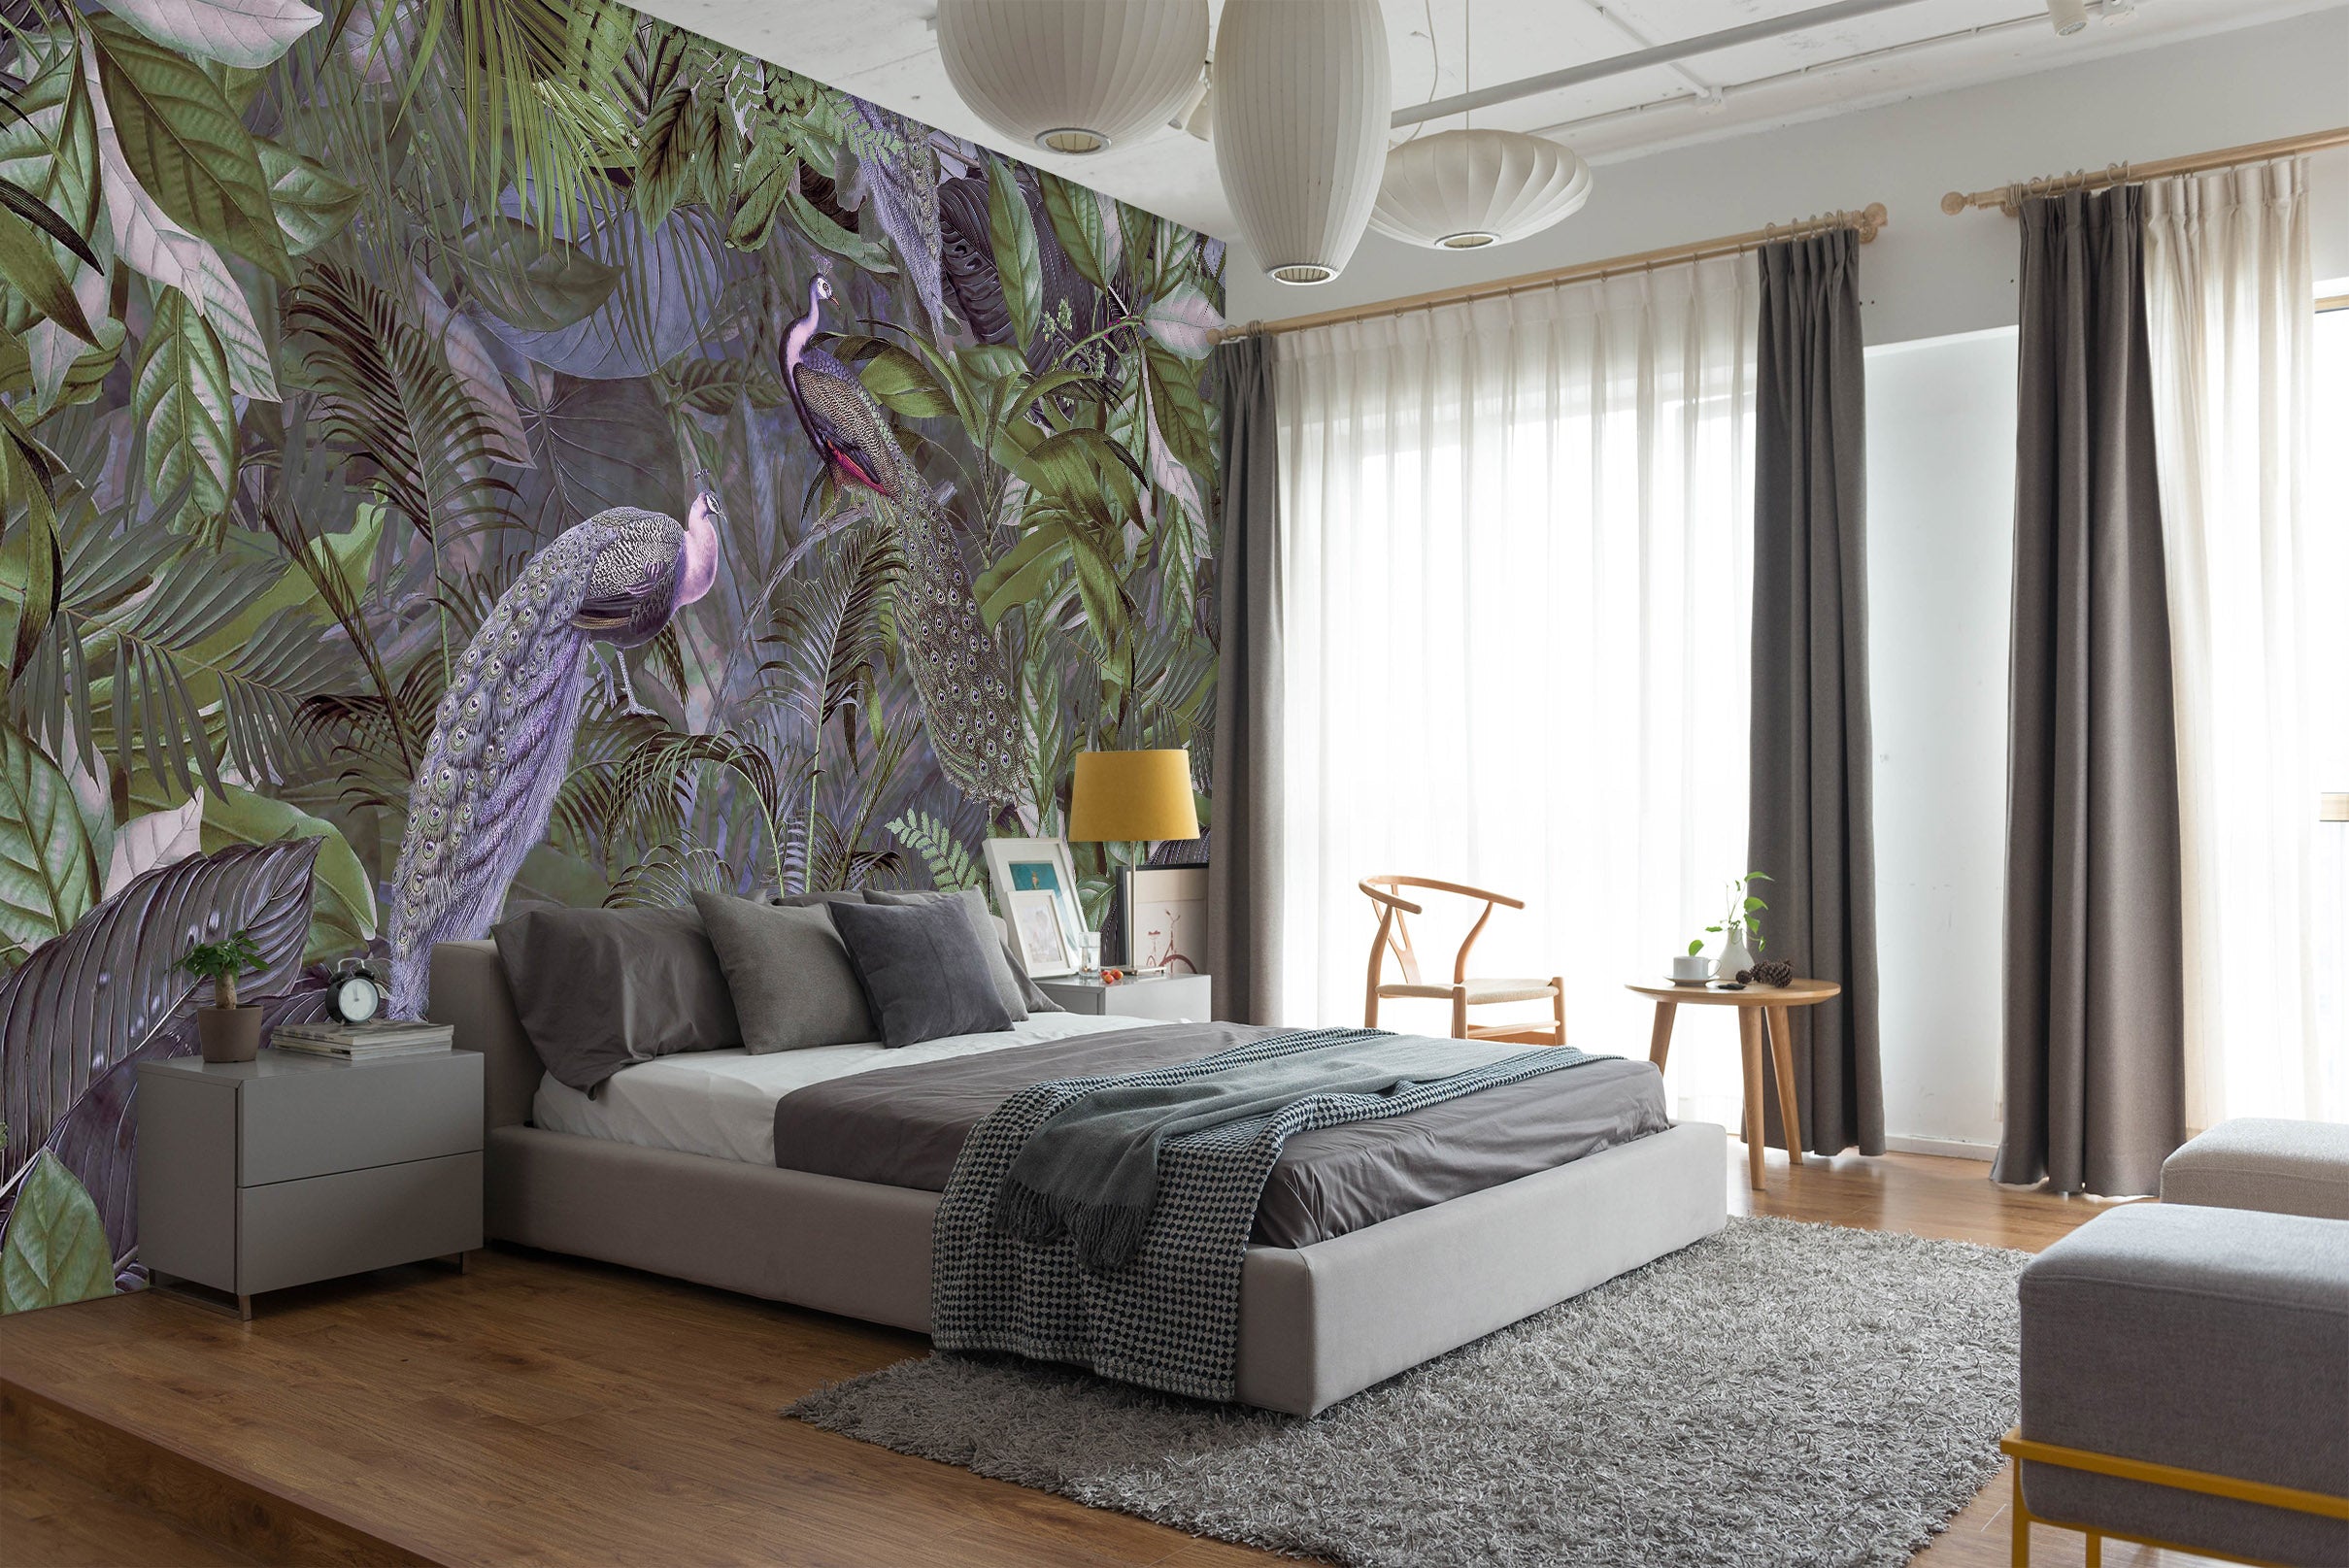 3D Forest Peacock 1012 Andrea haase Wall Mural Wall Murals